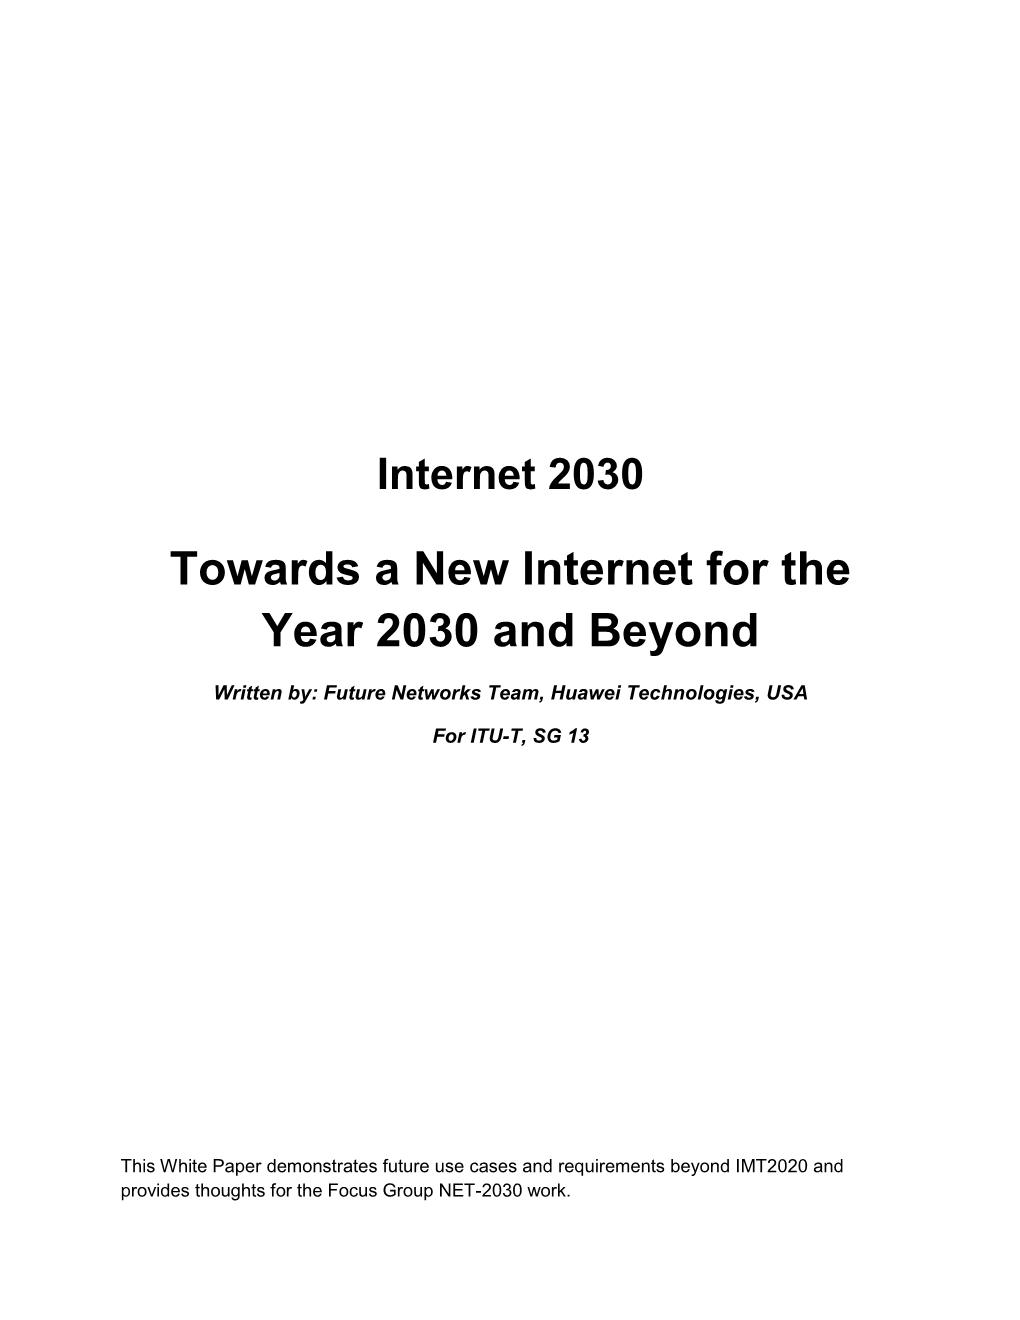 Towards a New Internet for the Year 2030 and Beyond